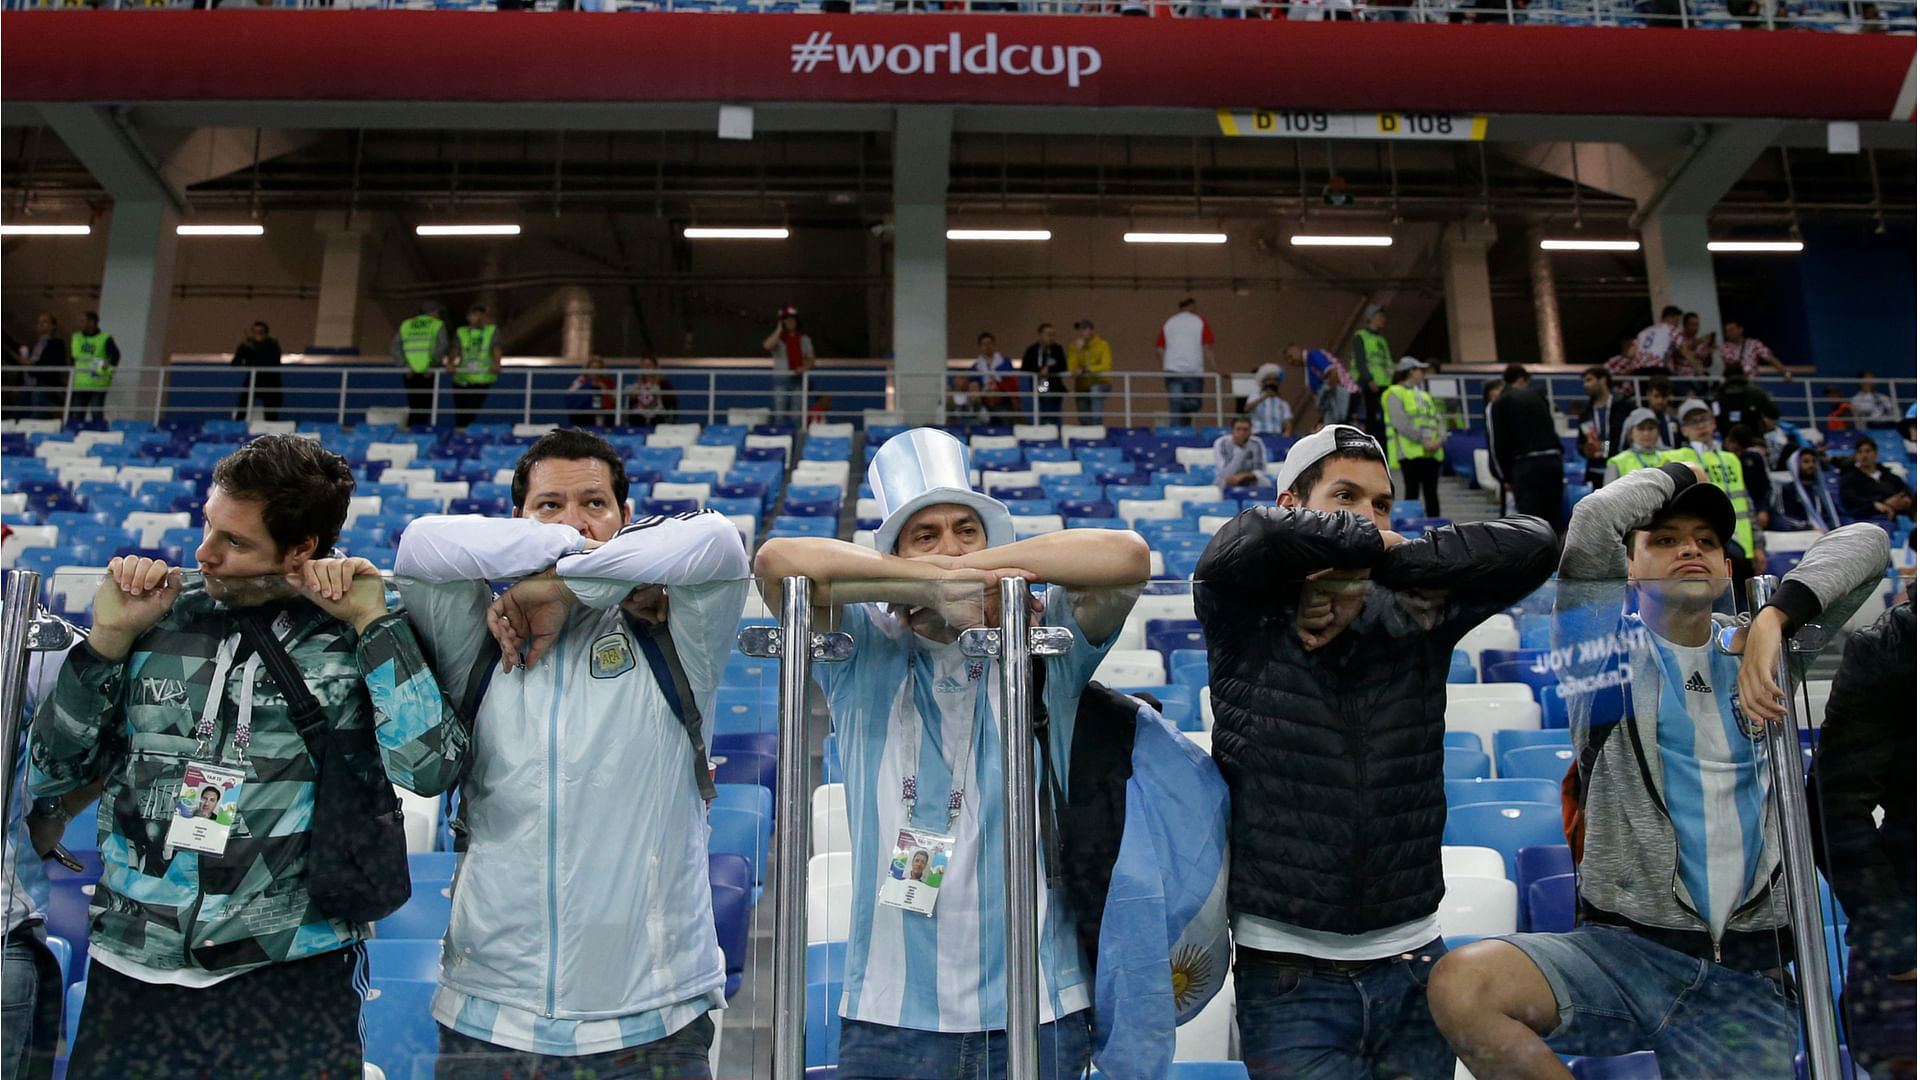 Argentinian fans’ frustration led to violent ends in the first major incident of fan assault at the FIFA World Cup 2018 in Russia